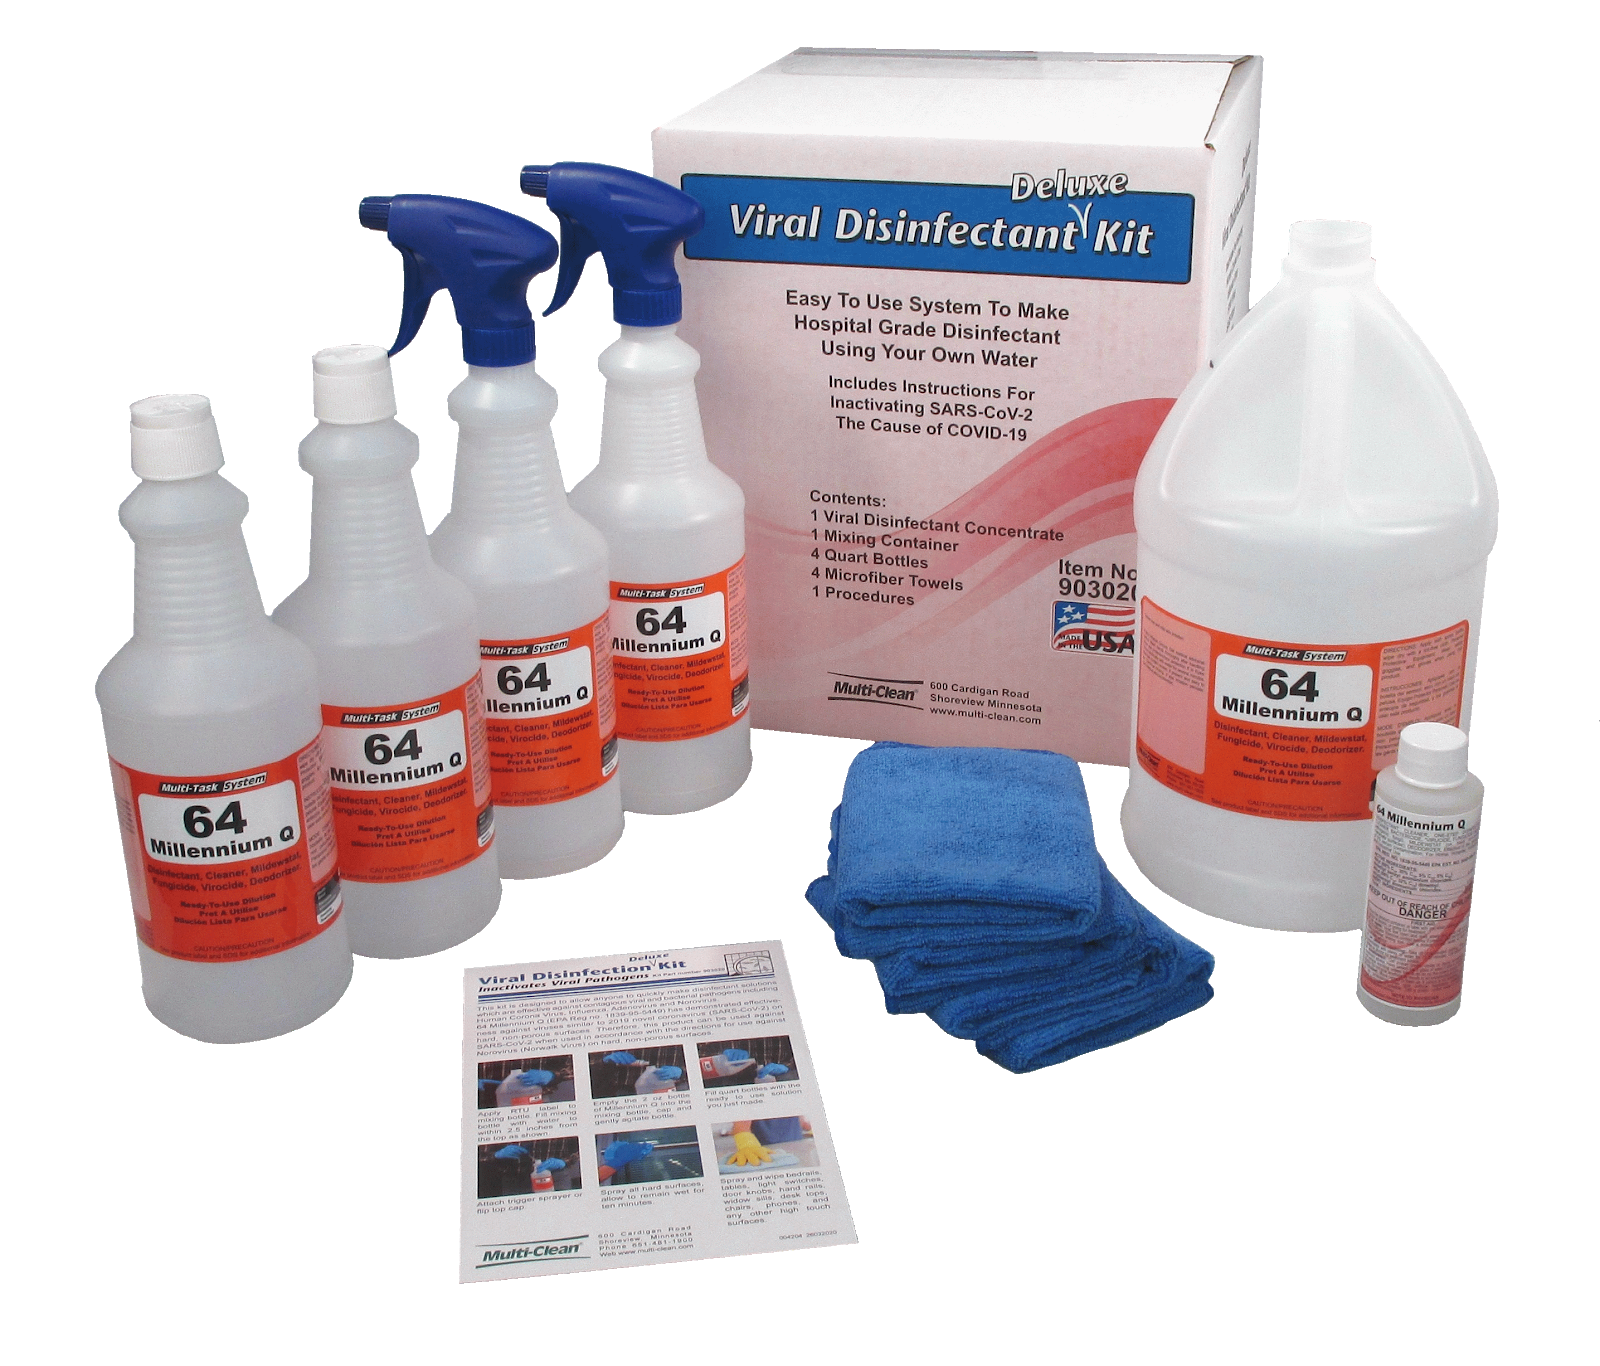 Multi-Clean has Right Products and Mindset to Combat COVID-19 Main Photo